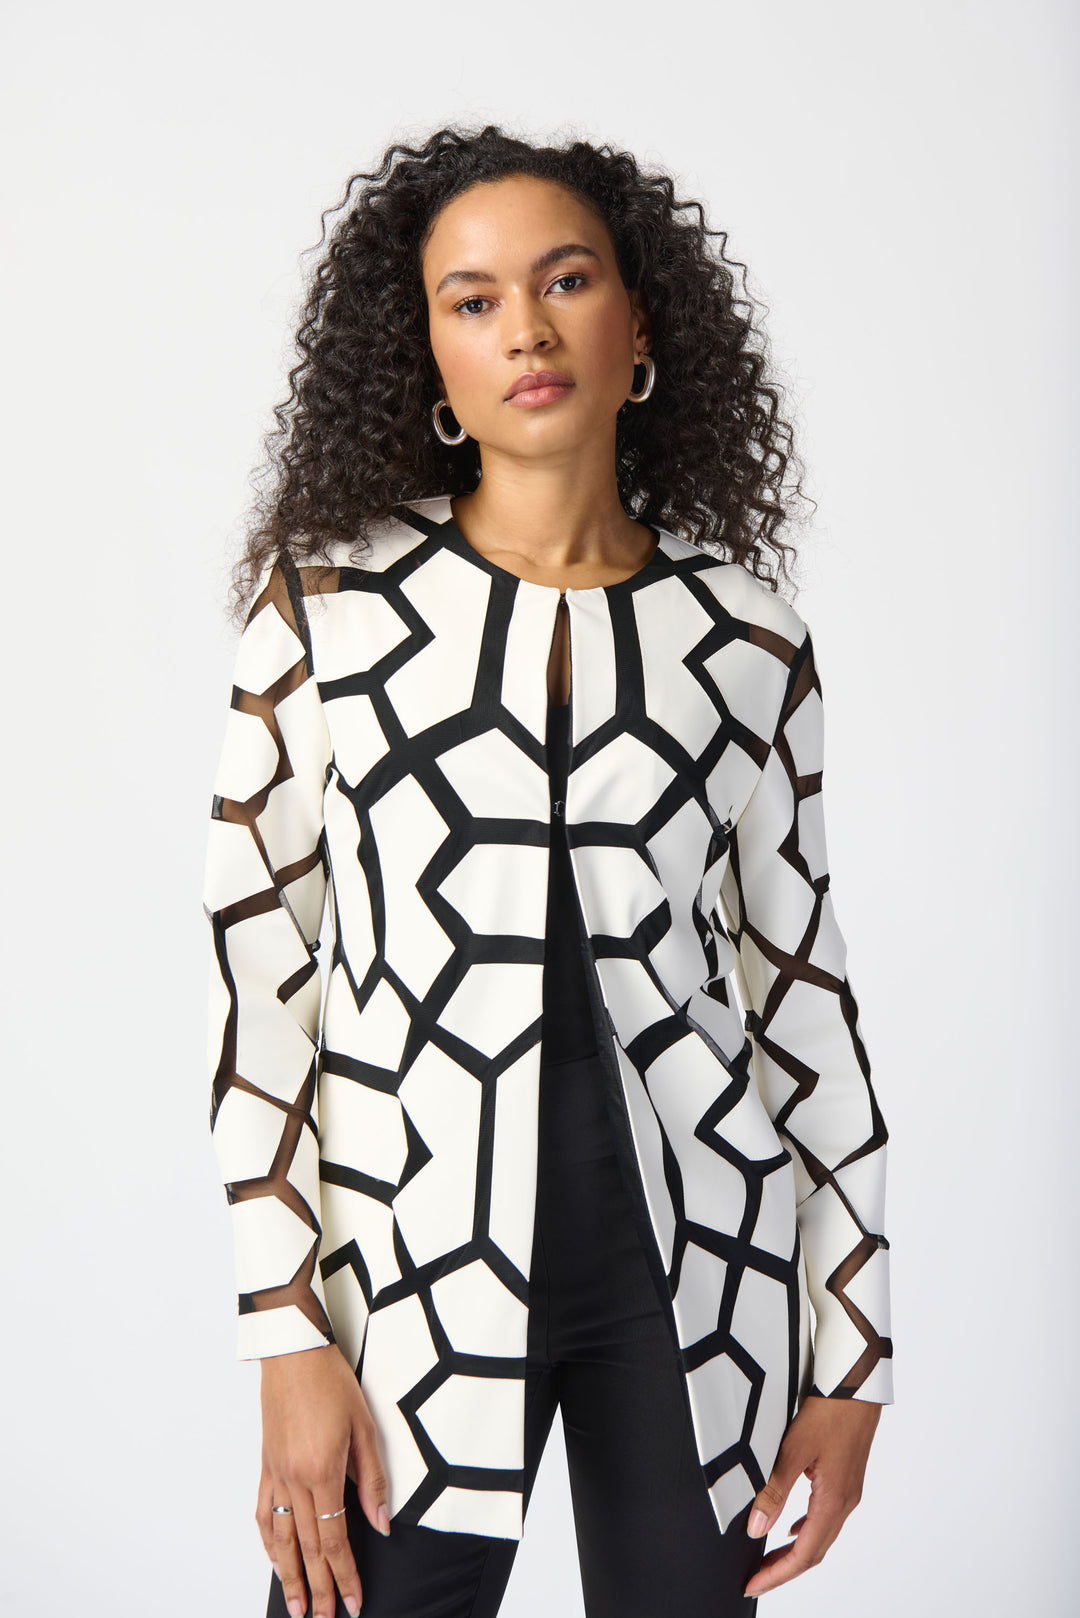 Featuring a striking geometric pattern design and a straight cut that accentuates your hips